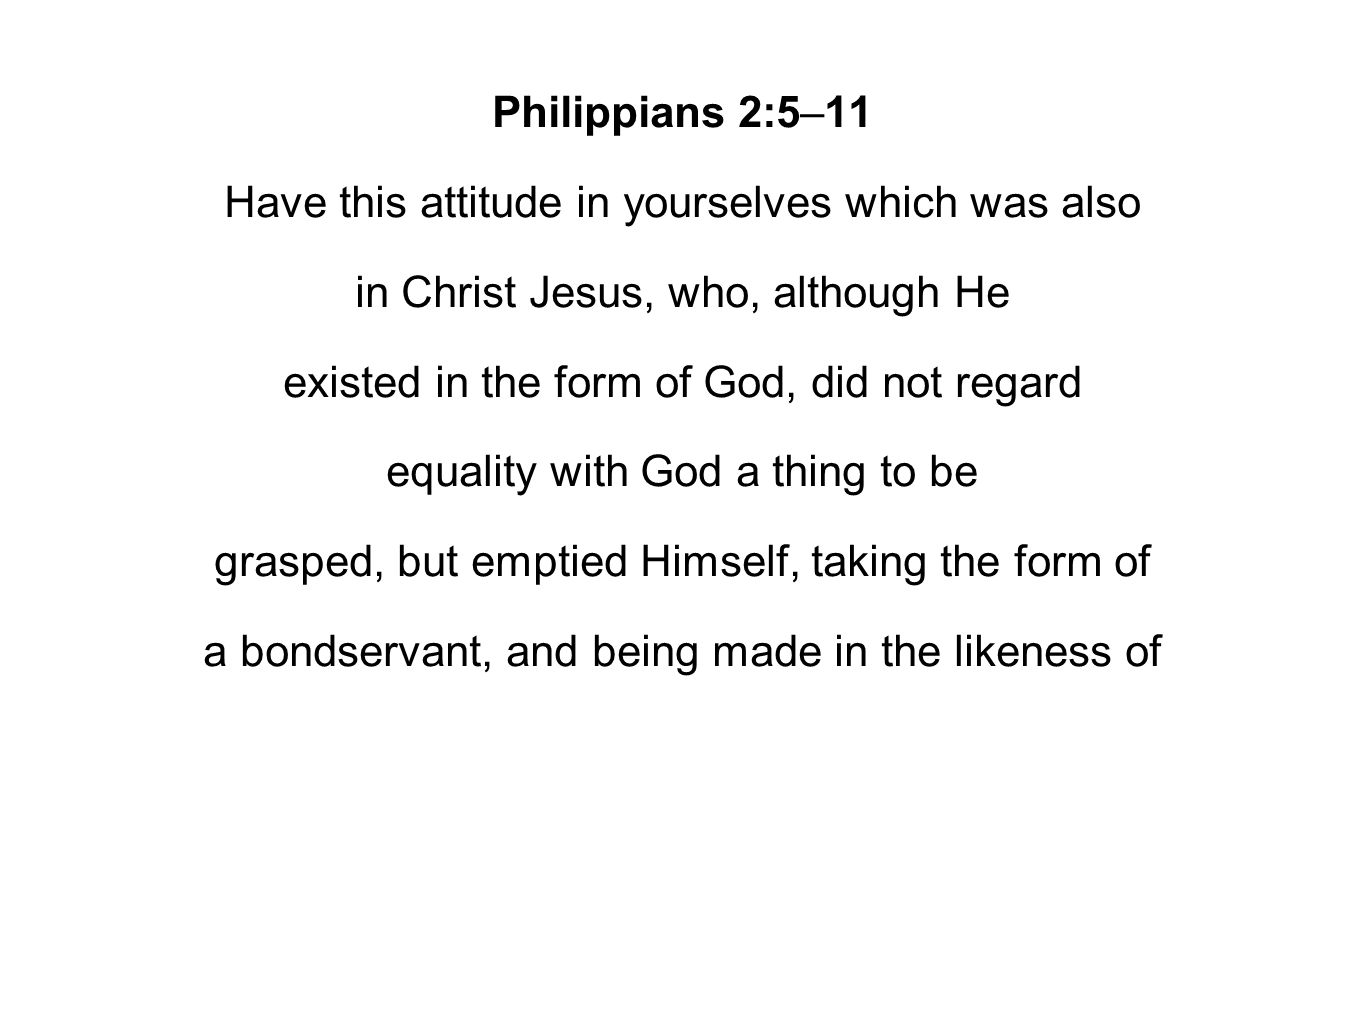 Philippians 2:5–11 Have this attitude in yourselves which was also in Christ Jesus, who, although He existed in the form of God, did not regard equality with God a thing to be grasped, but emptied Himself, taking the form of a bondservant, and being made in the likeness of